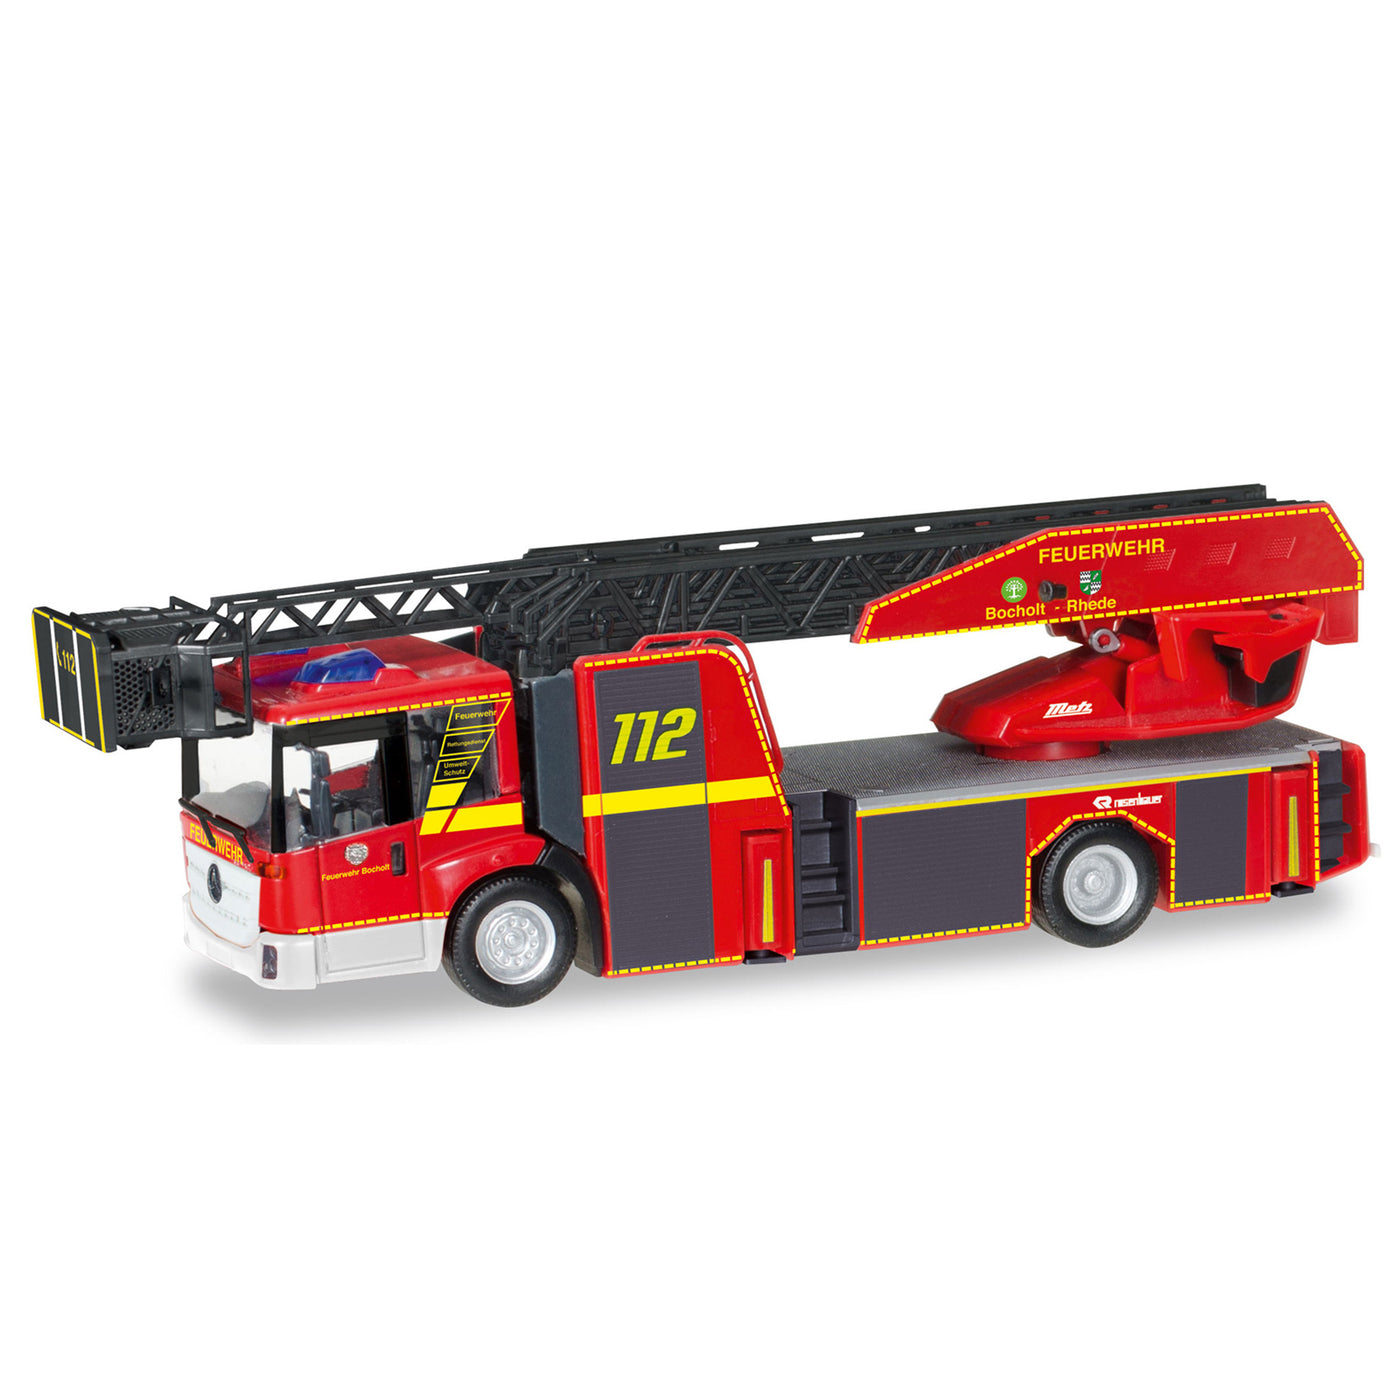 Herpa - 1/87 Mercedes-Benz Econic Turnable Ladde